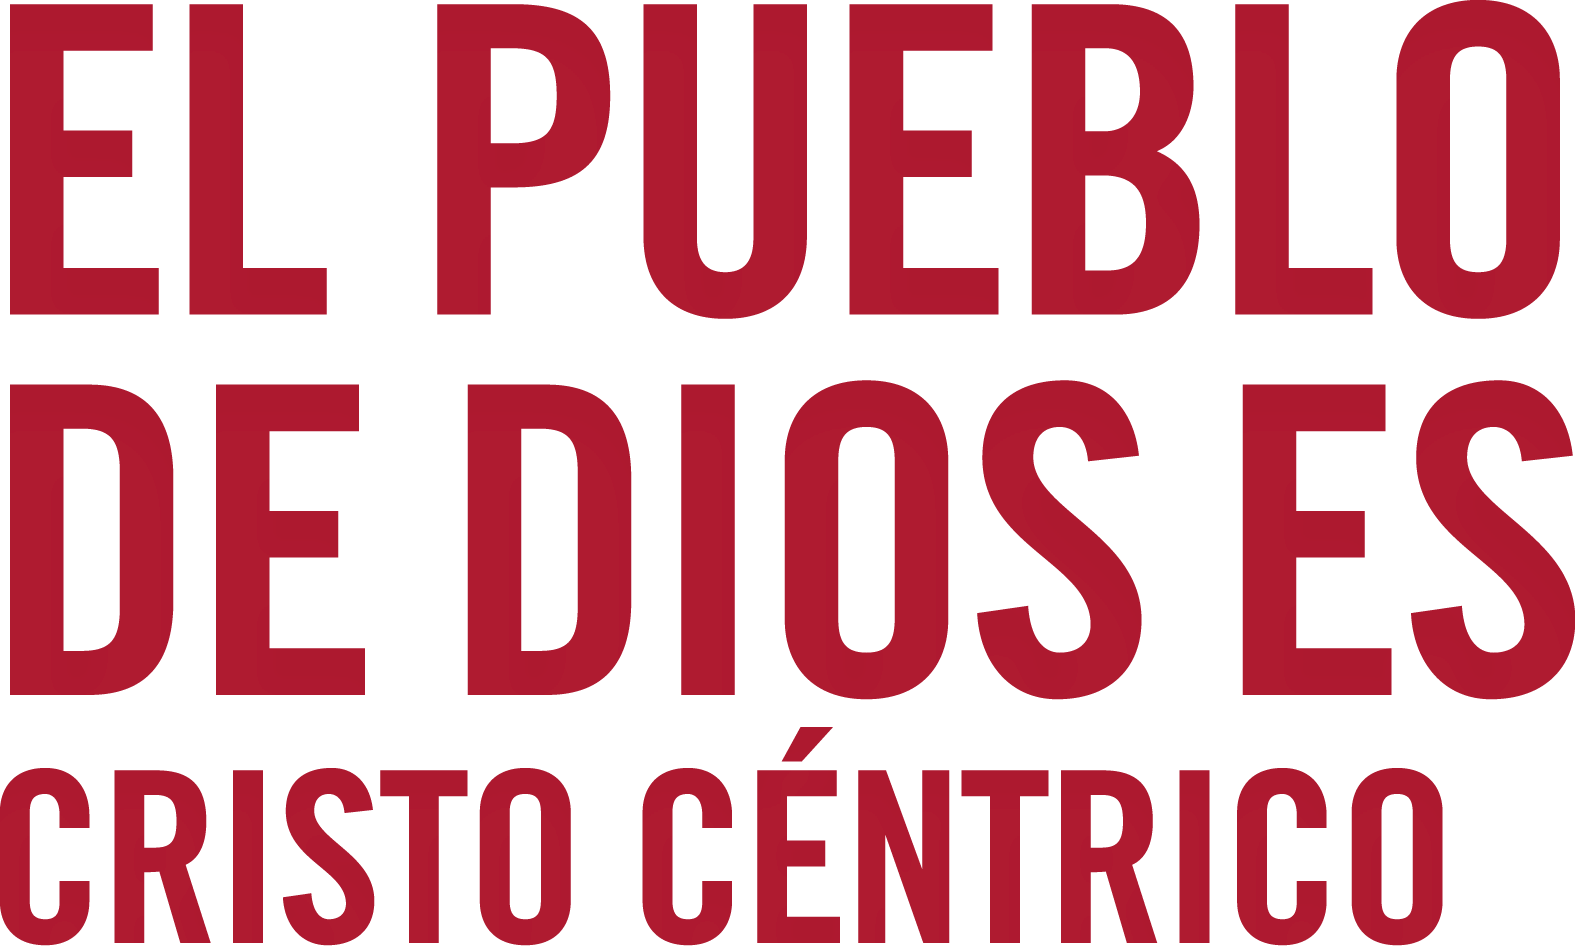 The #BeUMC campaign reminds us of who we are at our best. As people of God called The United Methodist Church, we’re faithful followers of Jesus seeking to make the world a better place. Christ-centered design asset, Spanish title.